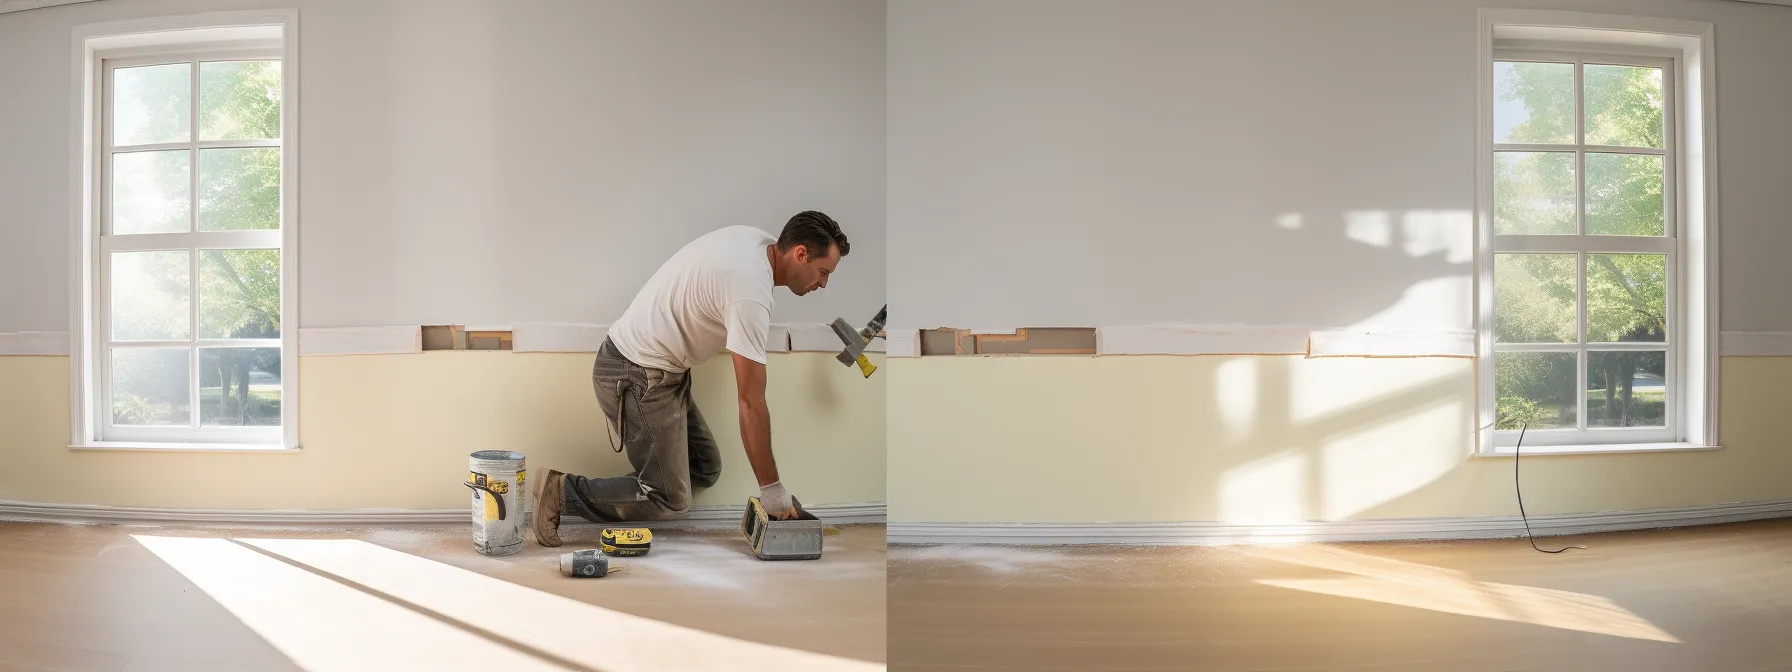 a person sanding a drywall surface with a sanding block in order to achieve a smooth finish.